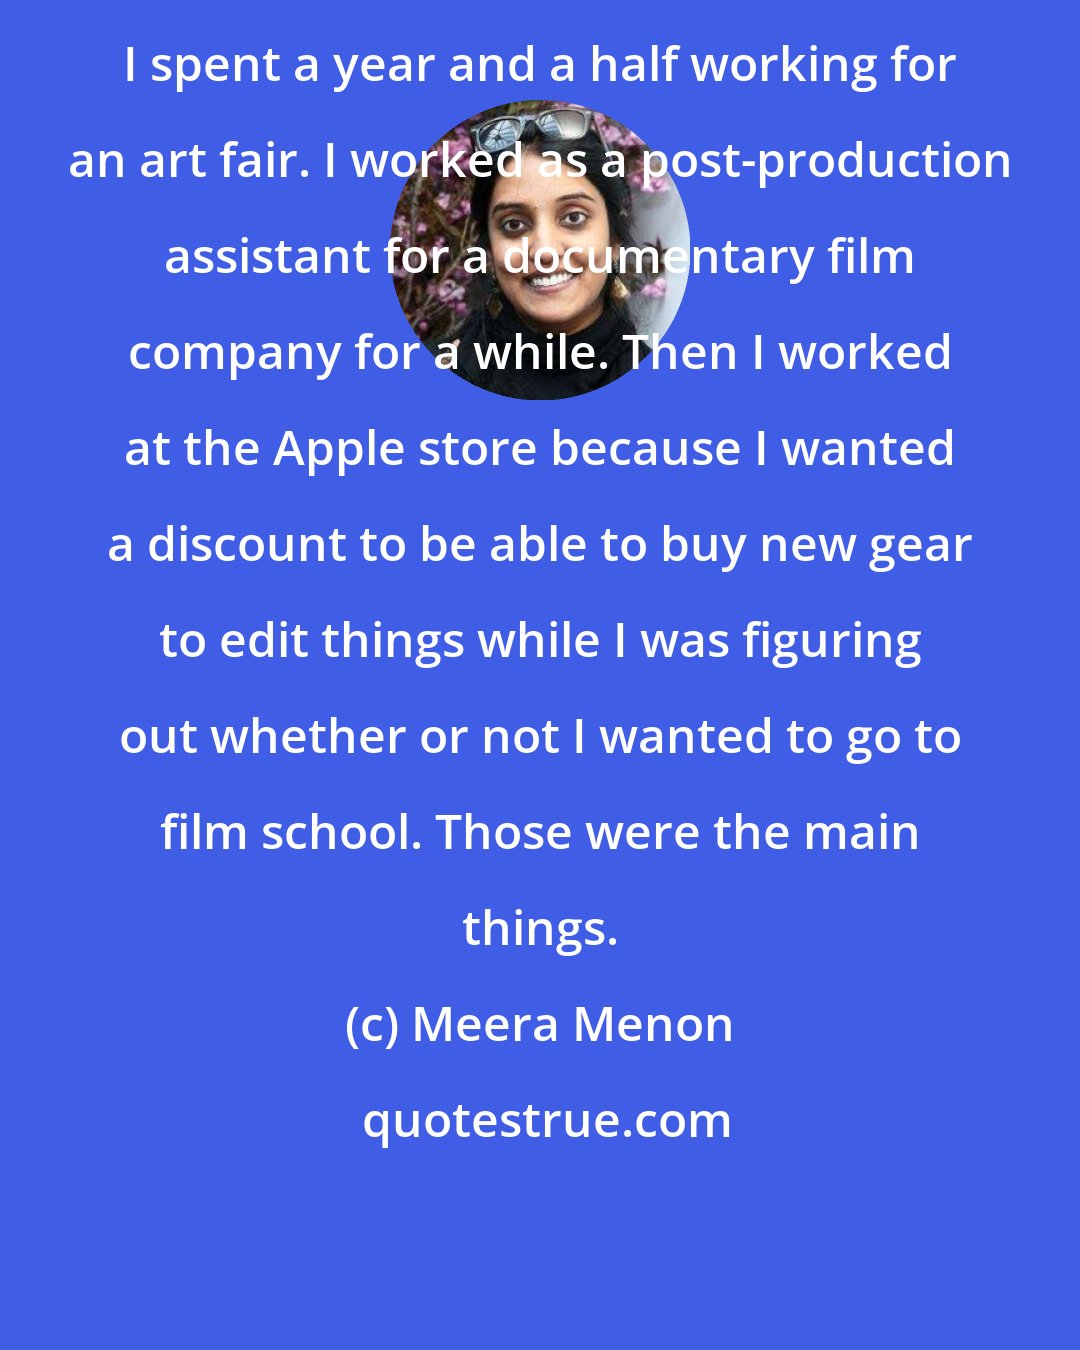 Meera Menon: I spent a year and a half working for an art fair. I worked as a post-production assistant for a documentary film company for a while. Then I worked at the Apple store because I wanted a discount to be able to buy new gear to edit things while I was figuring out whether or not I wanted to go to film school. Those were the main things.